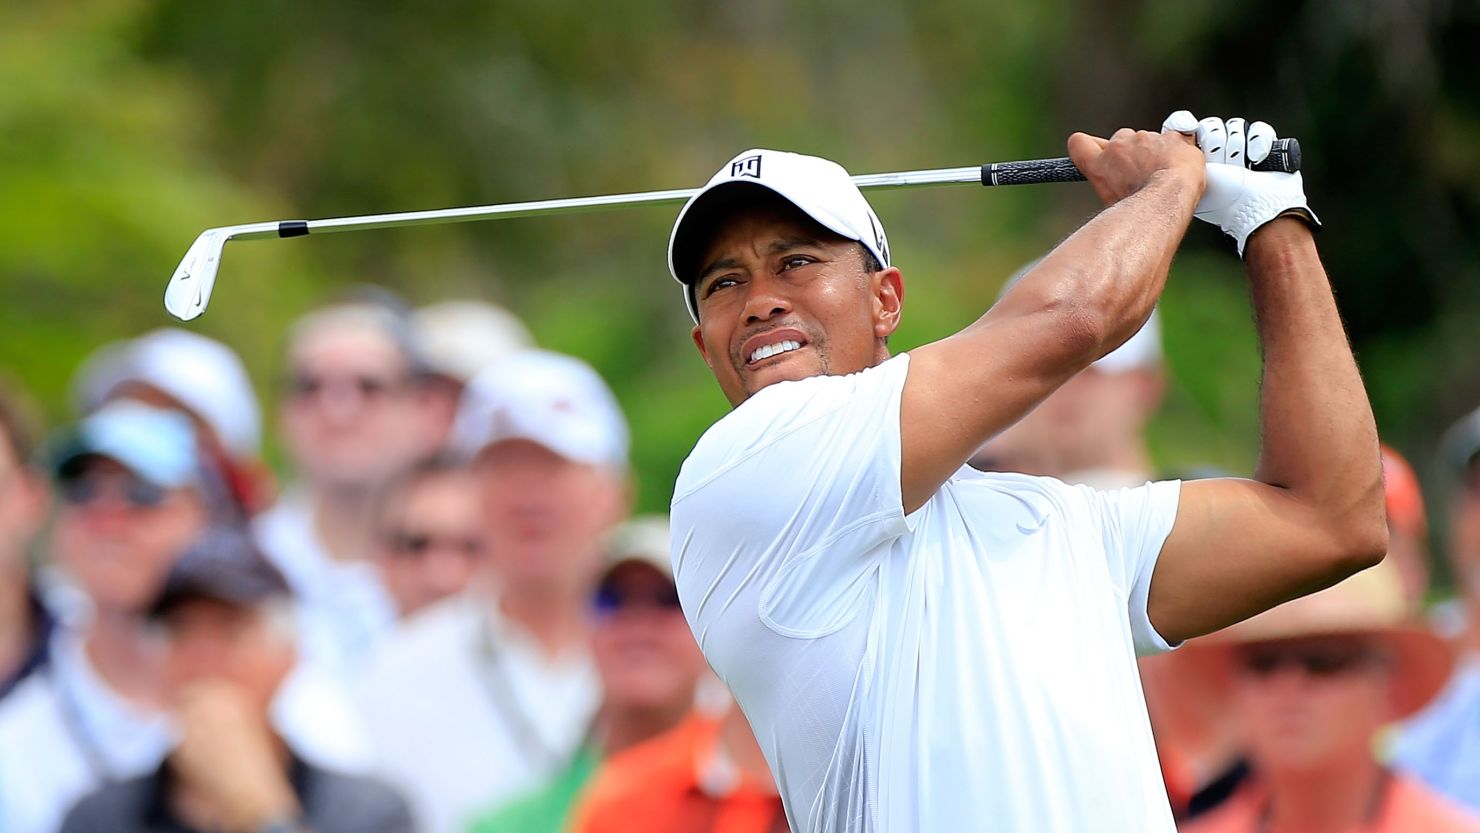 Tiger Woods will go into Sunday's final round of the Arnold Palmer Invitational with a two-shot lead.